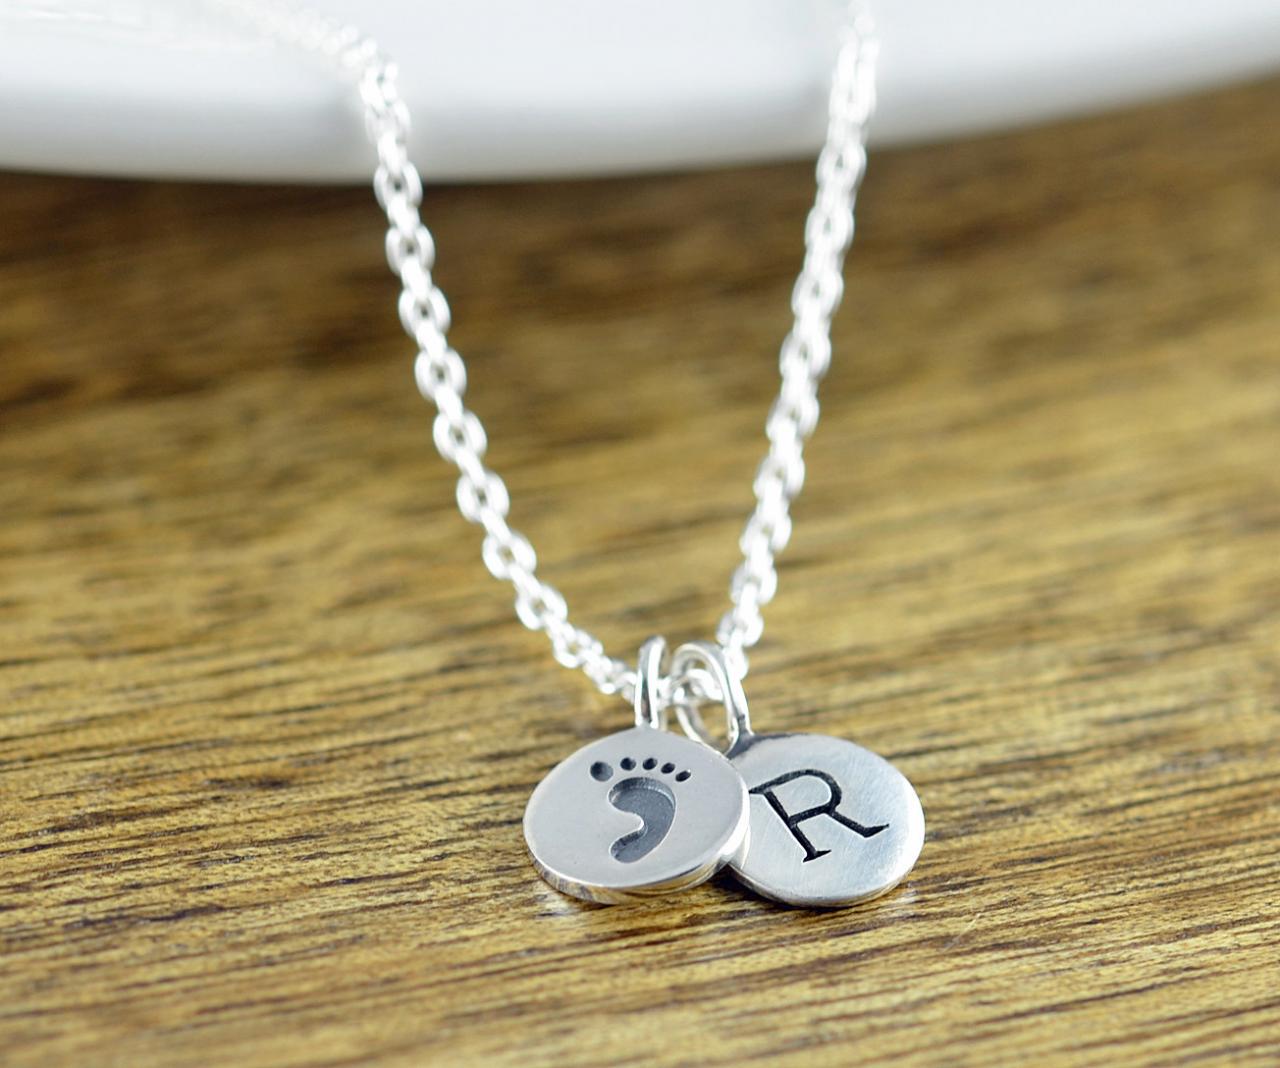 Baby Footprint Necklace - Mom Gift - Sterling Silver Charm Necklace - Personalized Initial Jewelry - Custom Push Present Necklace